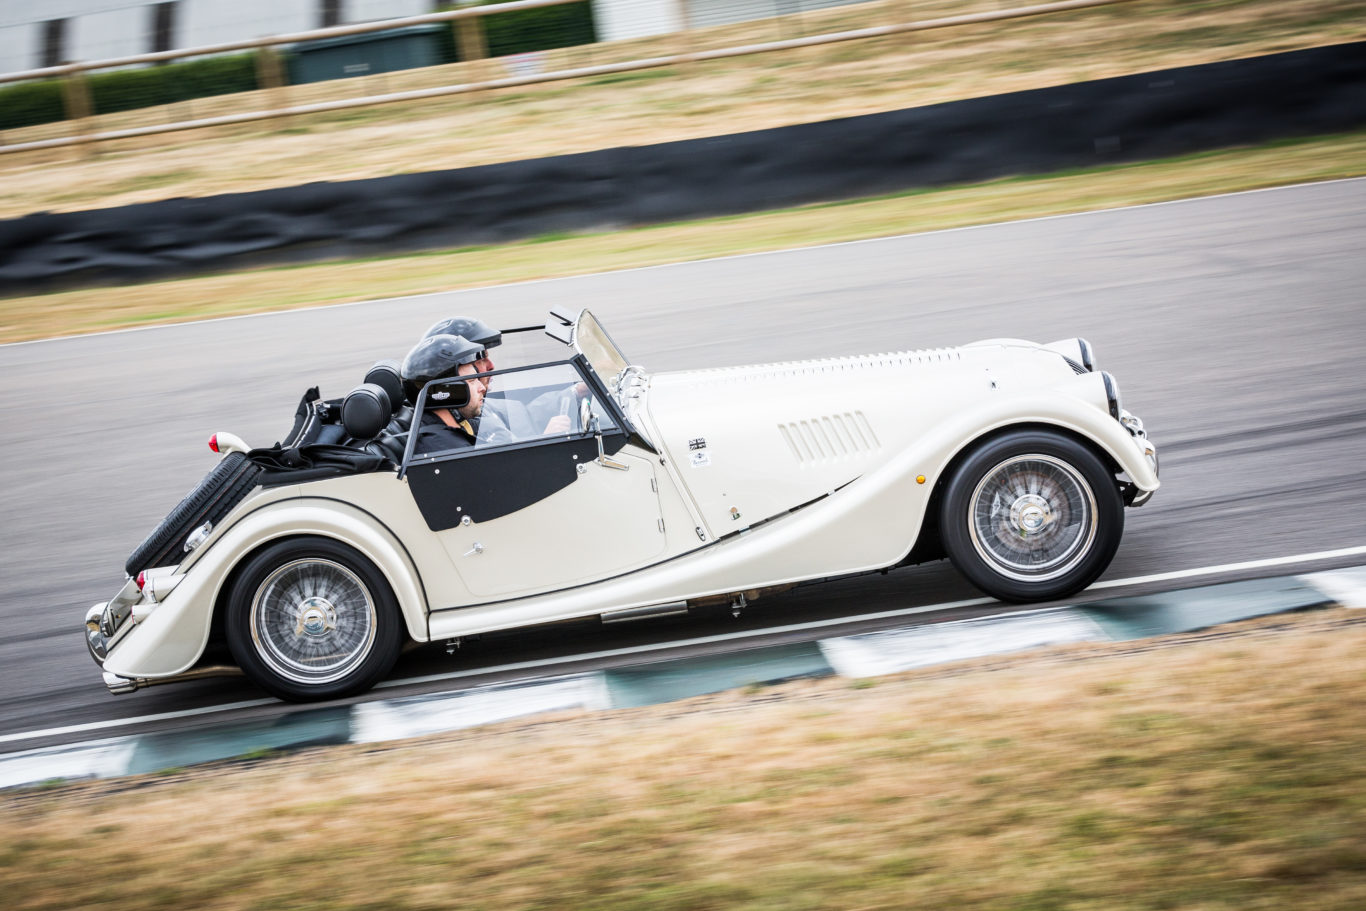 The Morgan handled the sweeping bends well